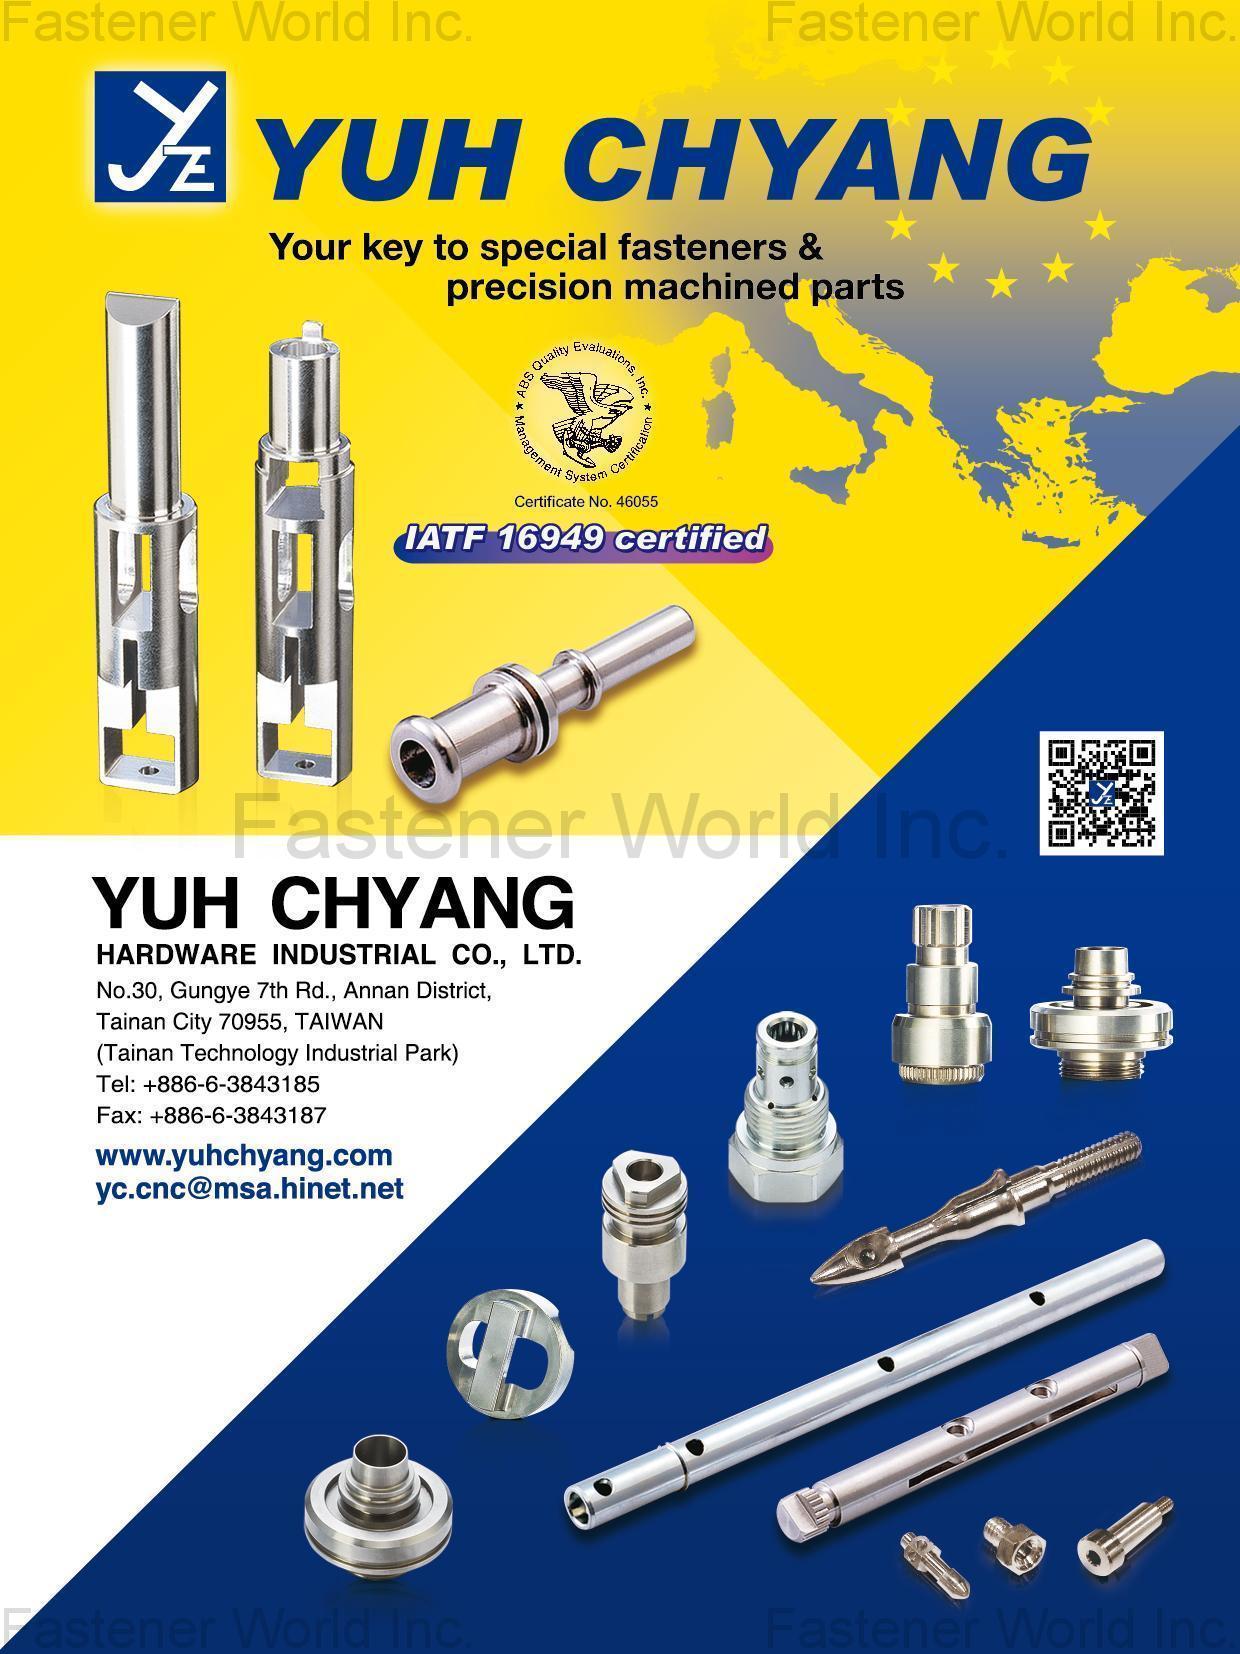 YUH CHYANG HARDWARE INDUSTRIAL CO., LTD.  , Manufacturer of Special Machined Parts , Precision Metal Parts